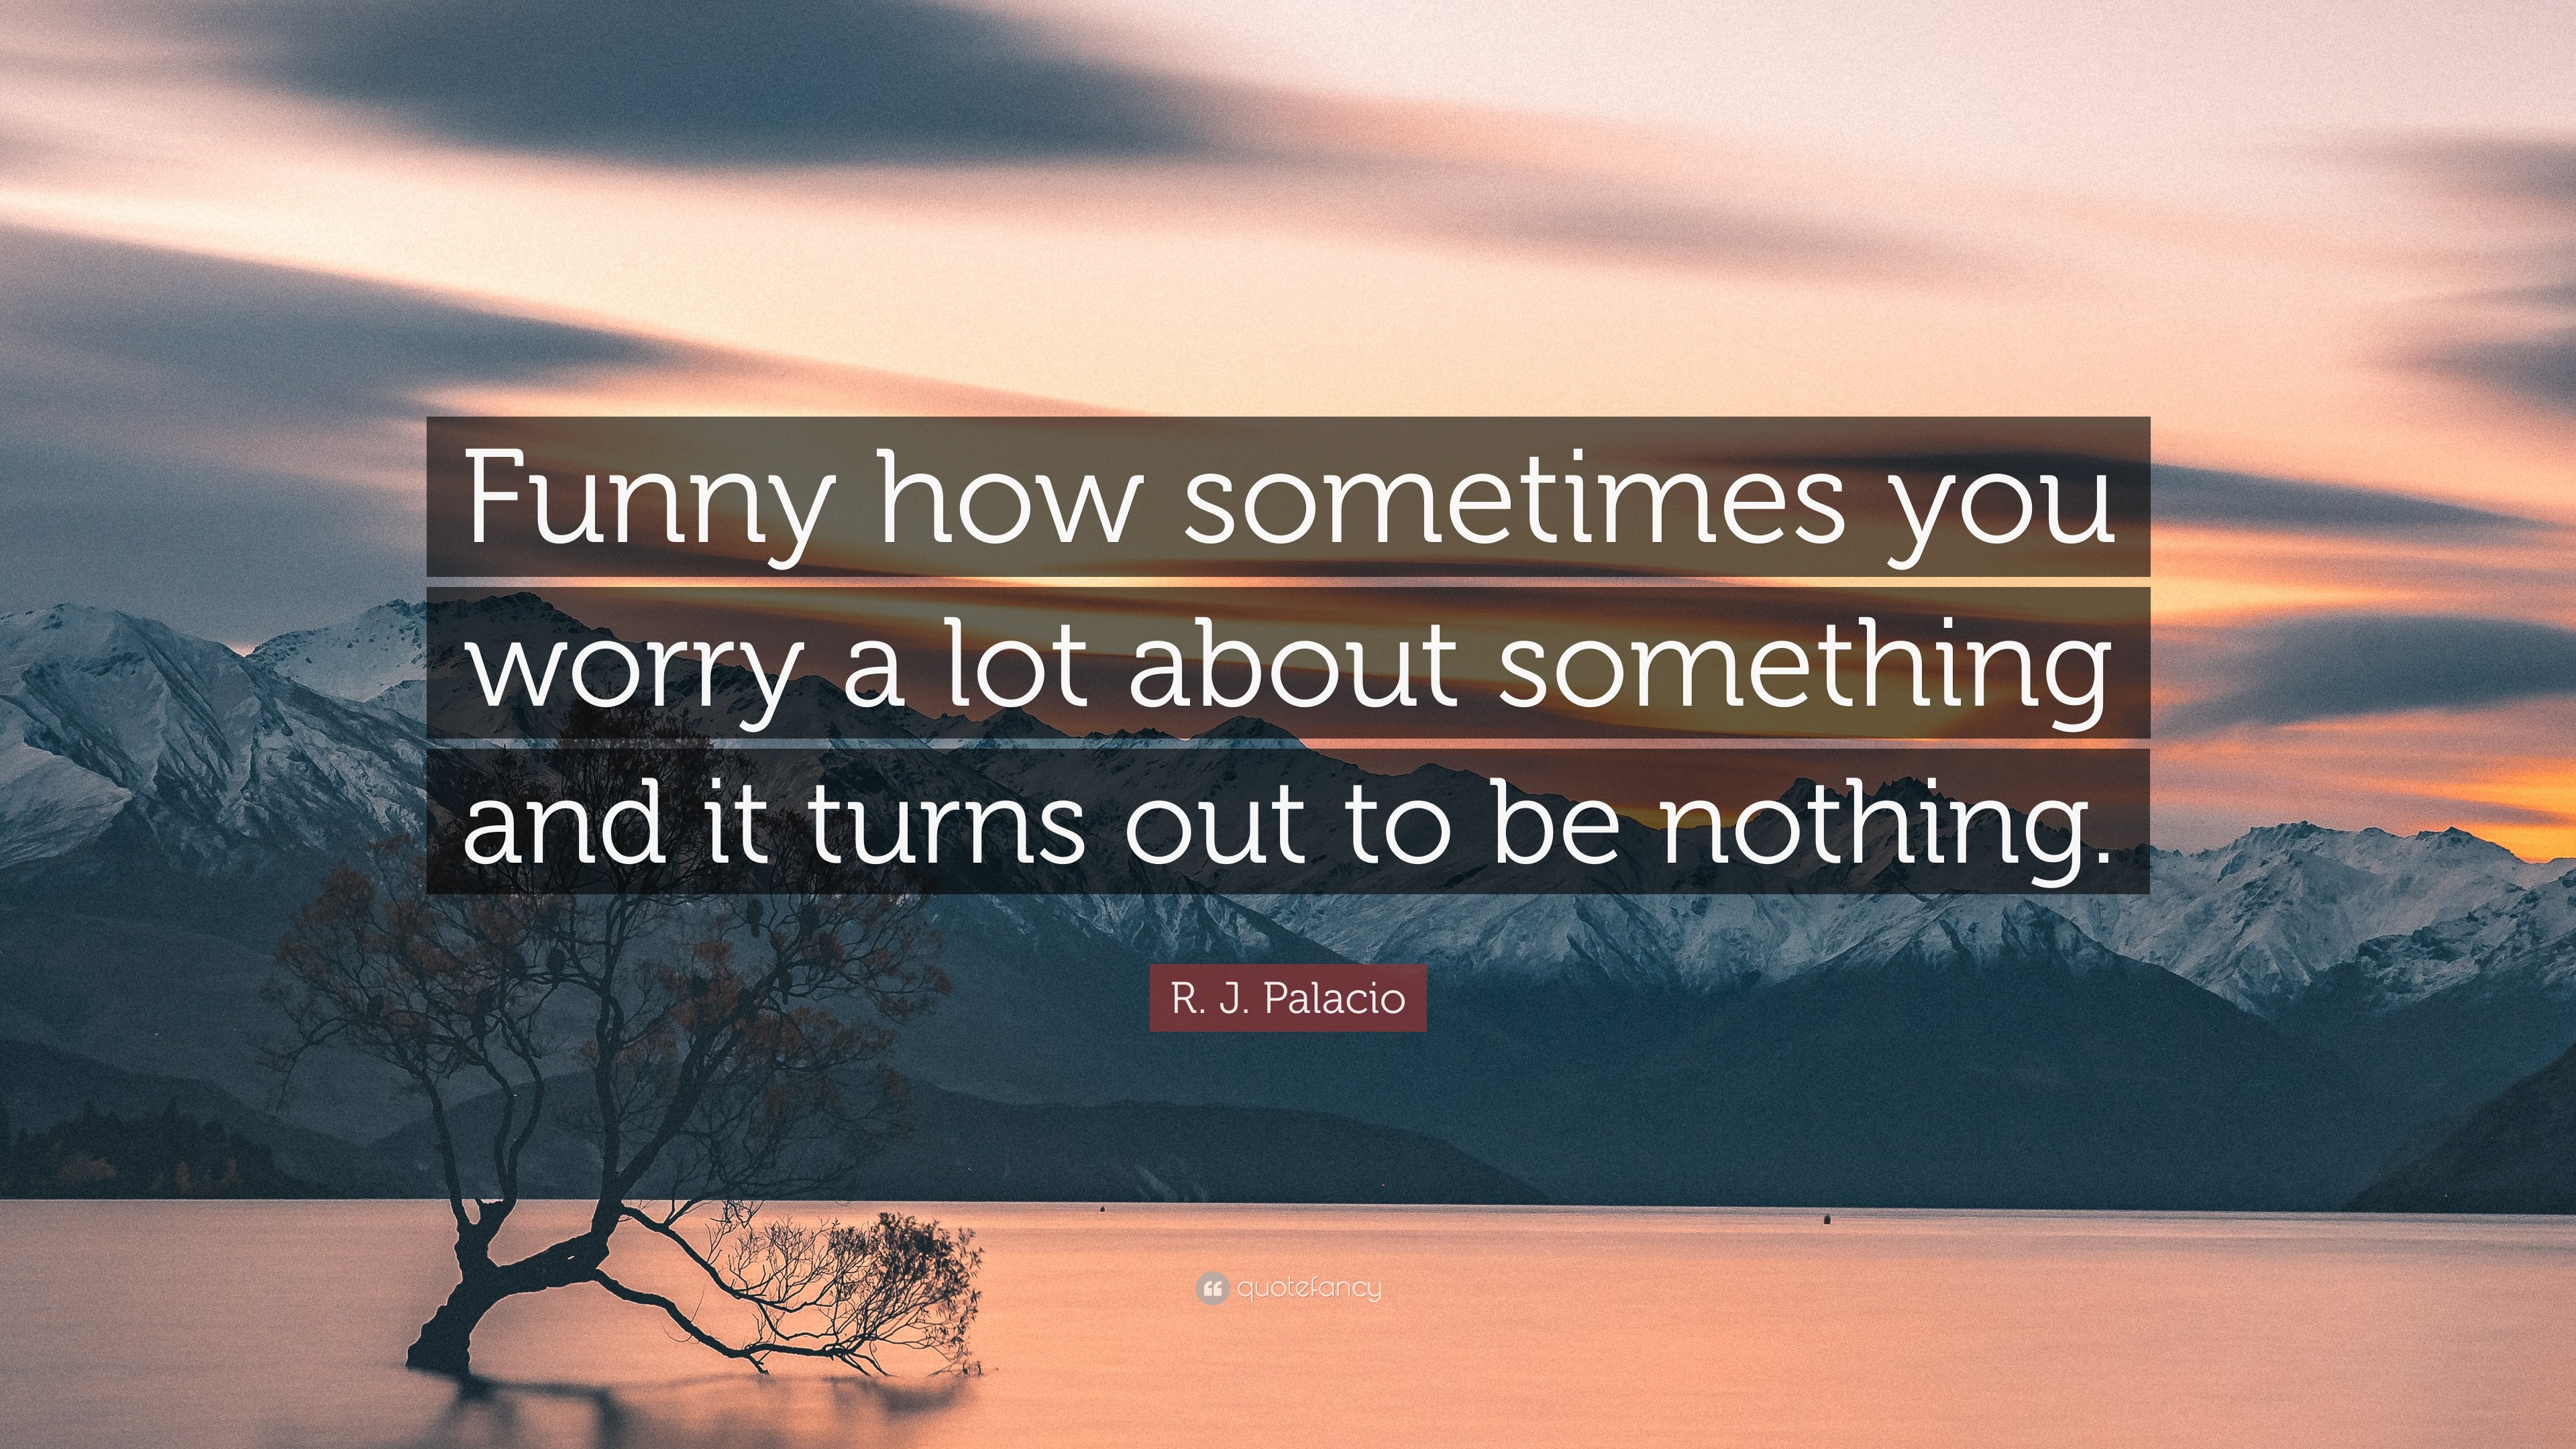 R. J. Palacio Quote: “Funny how sometimes you worry a lot about something  and it turns out